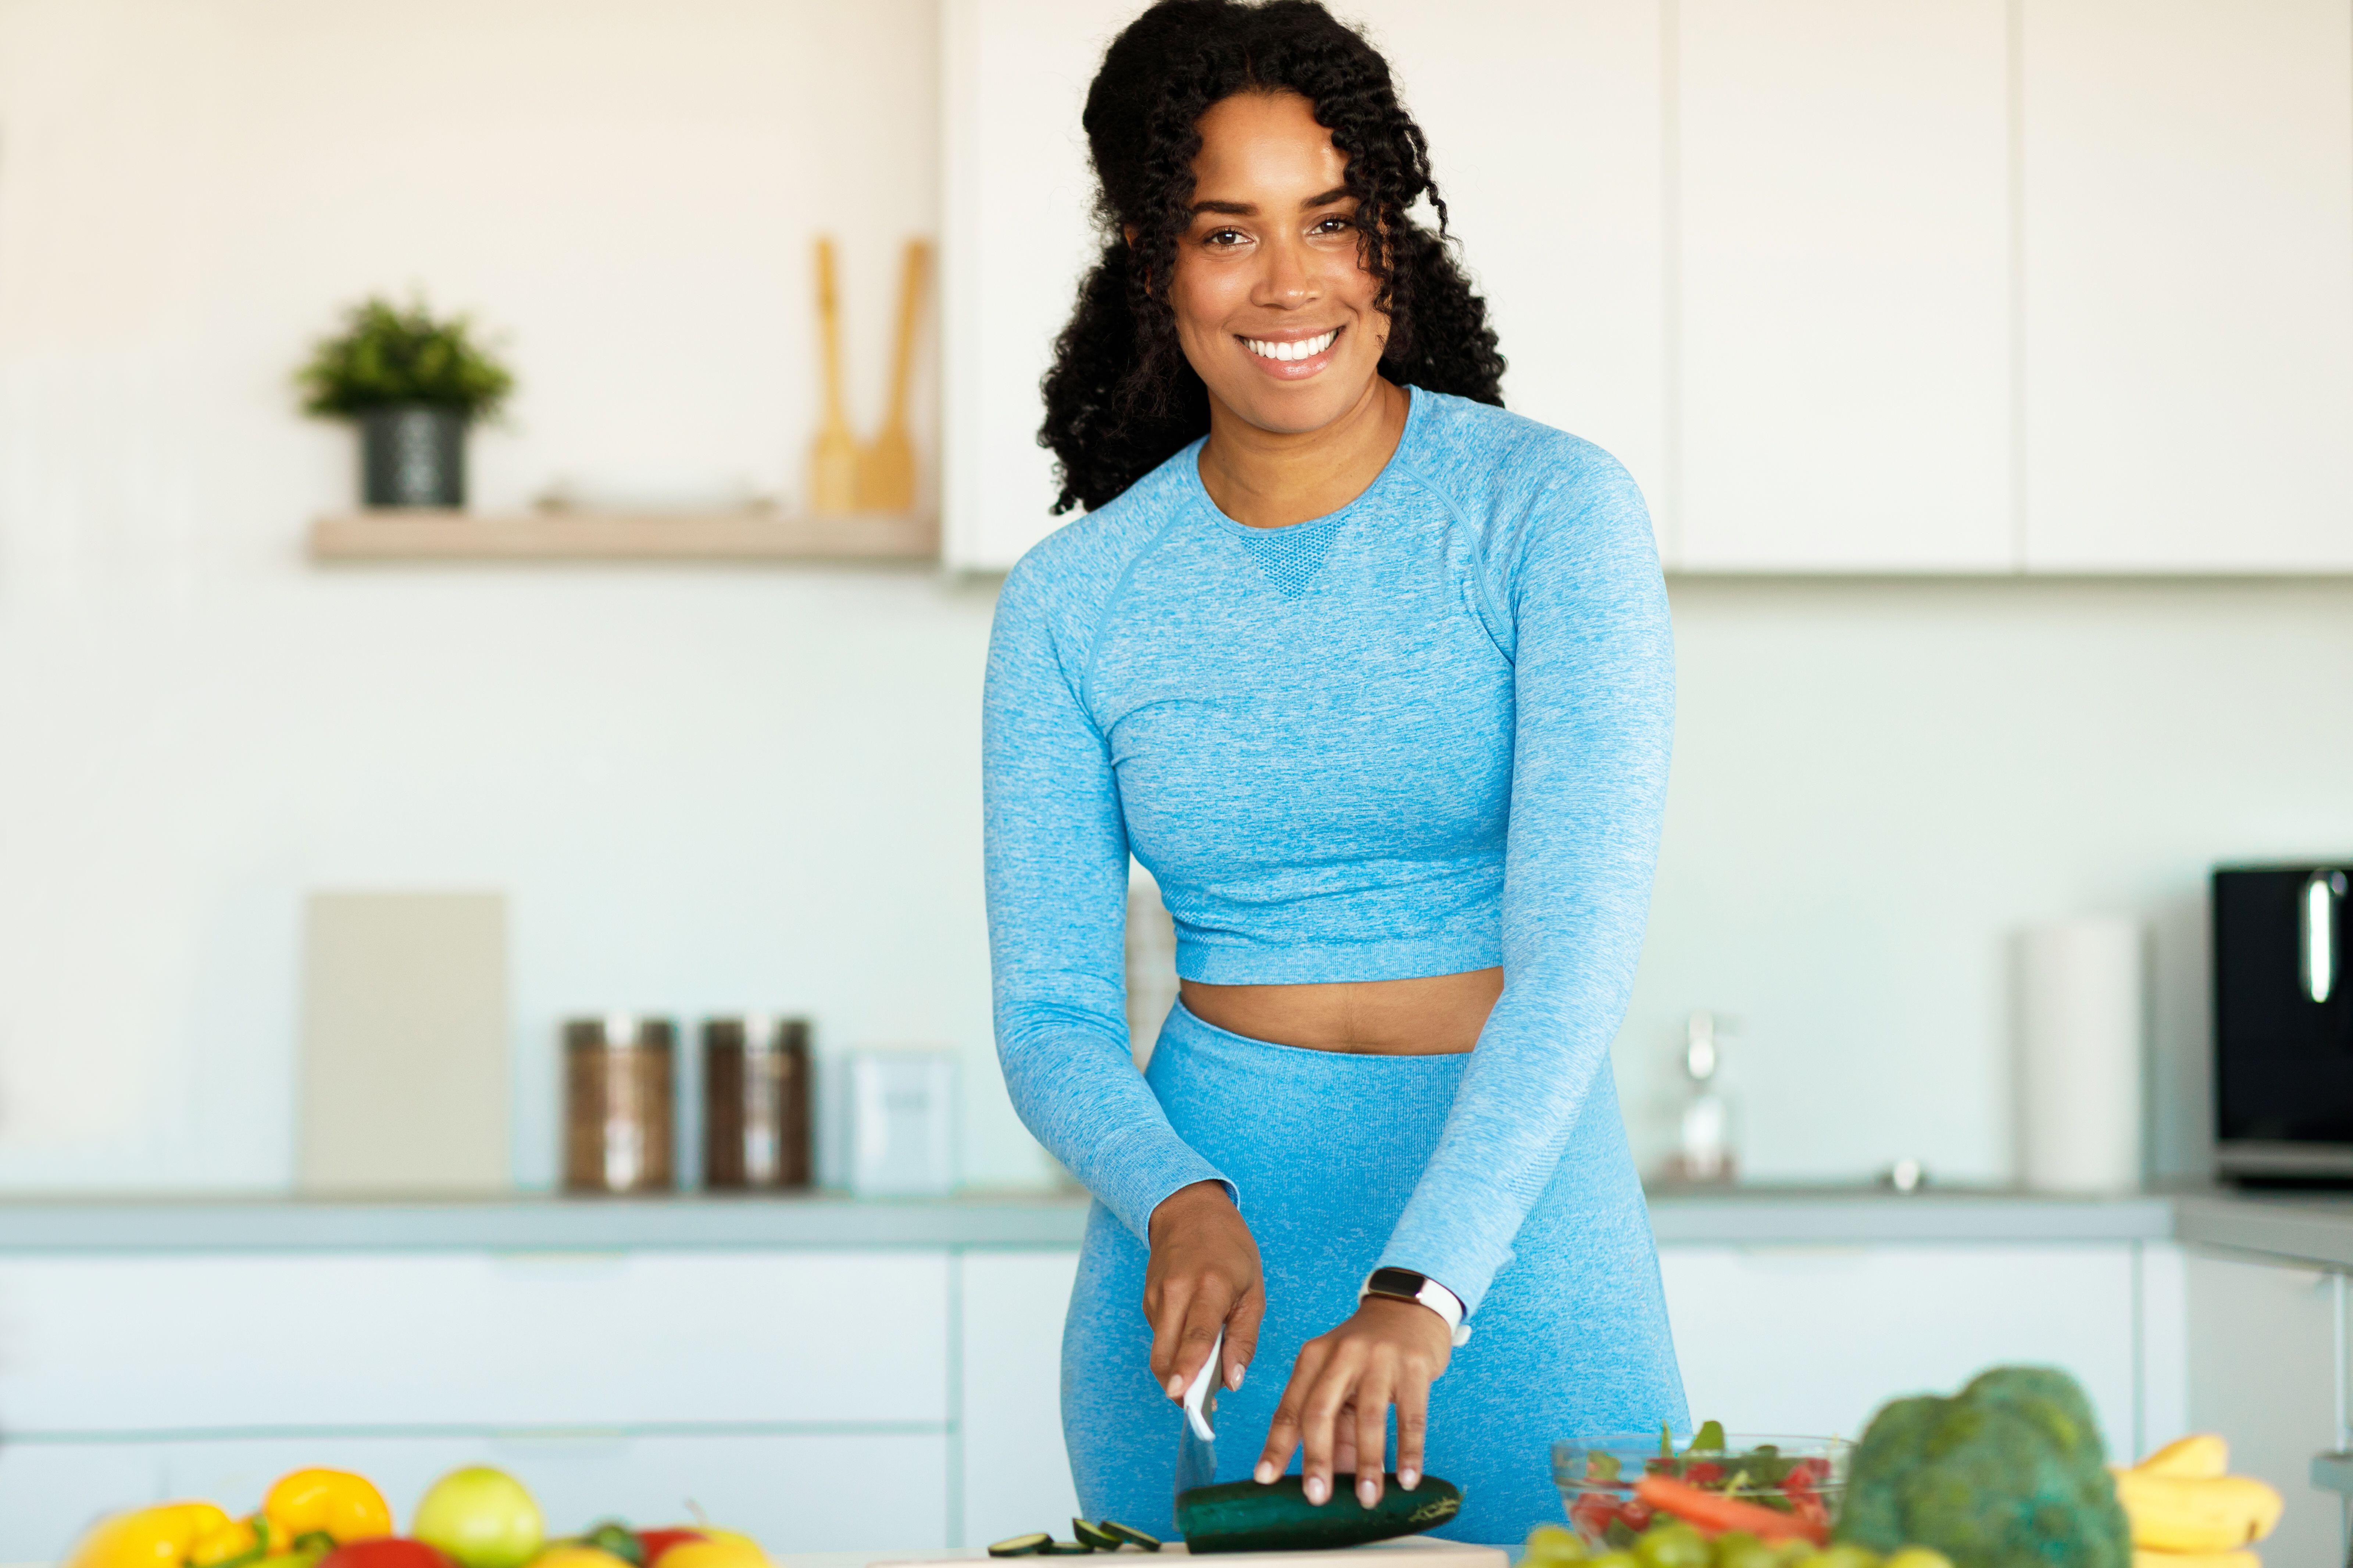 Young woman in fitness gear cooking a healthy meal